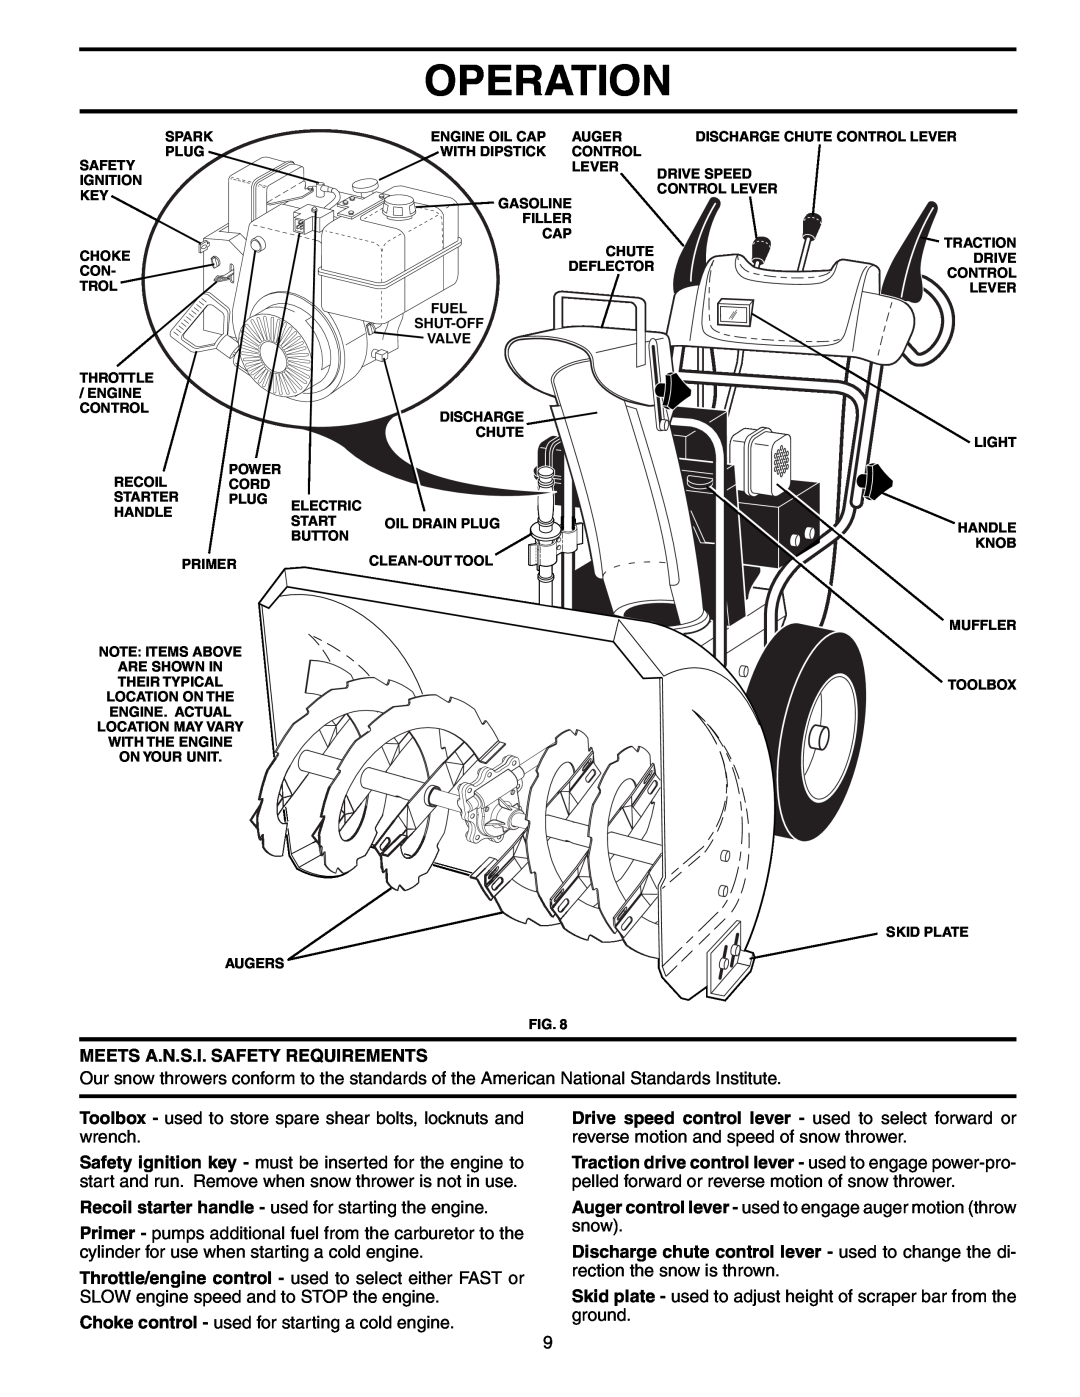 Poulan 192030 owner manual Operation, Meets A.N.S.I. Safety Requirements 